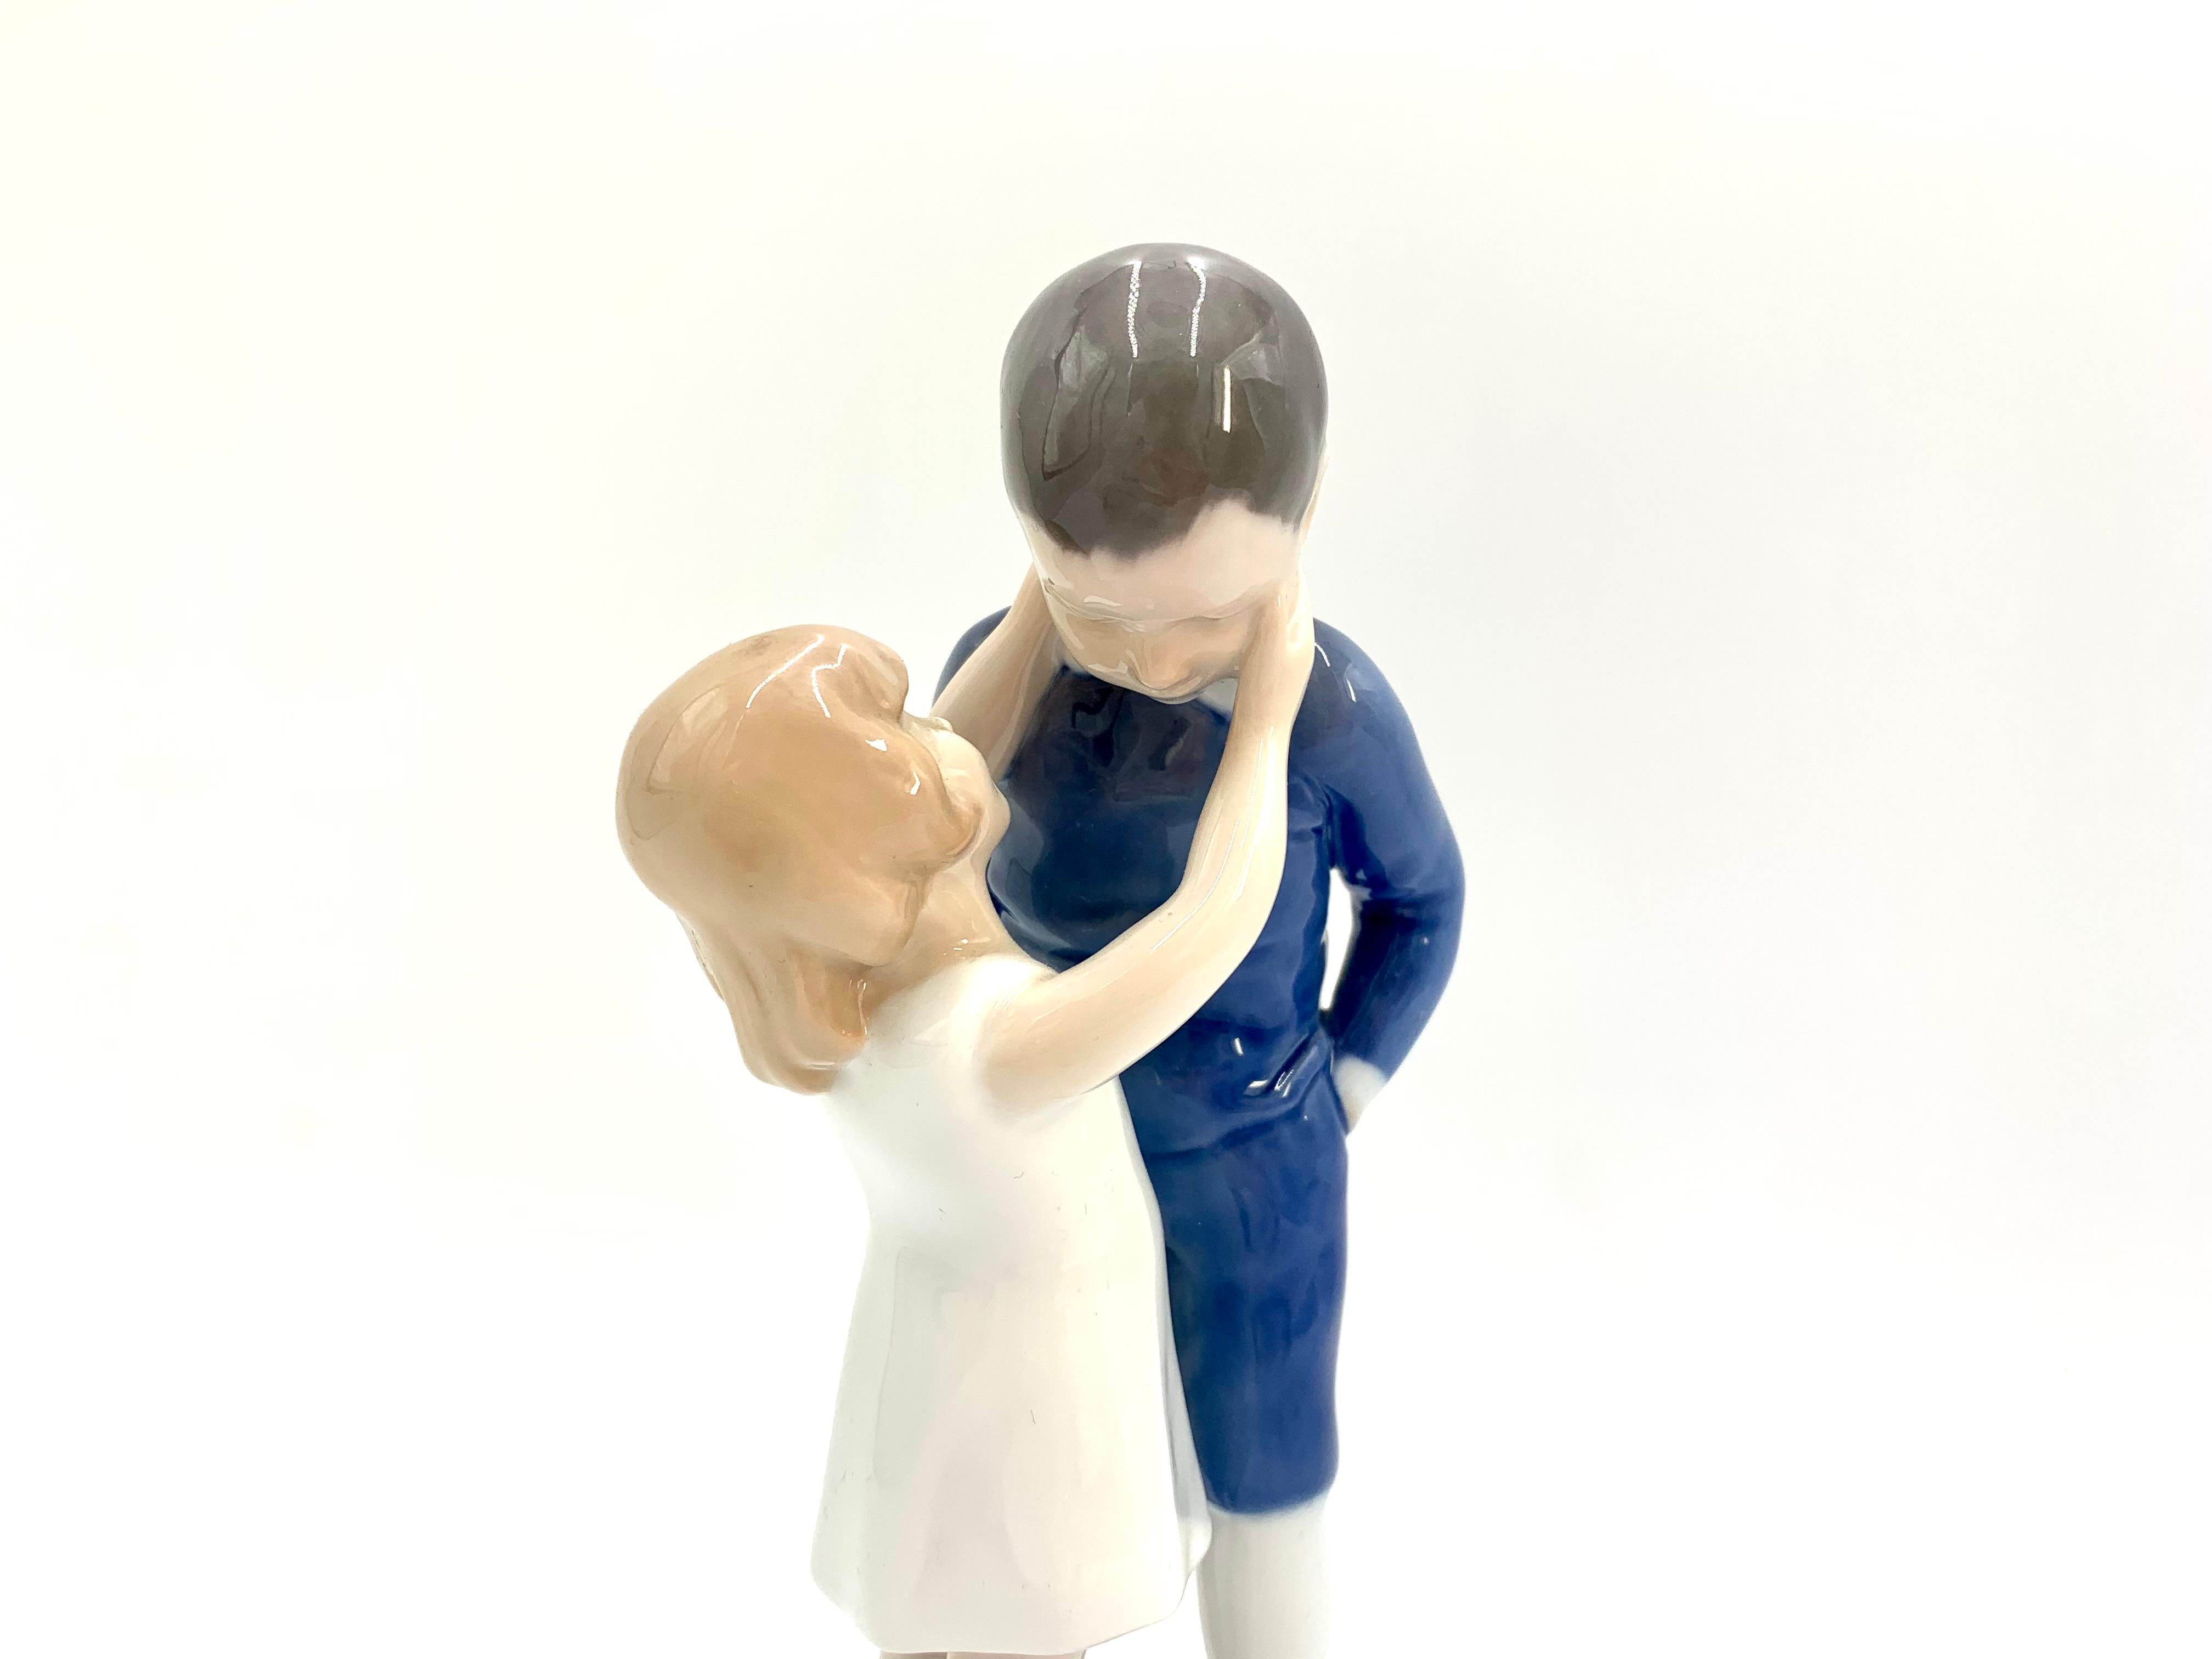 Porcelain figurine of a girl with a boy

Made in Denmark by Bing & Grondahl

Produced in 1960-70

Model number # 1781

Very good condition, no damage

Measures: Height 21cm, diameter 8.5cm.